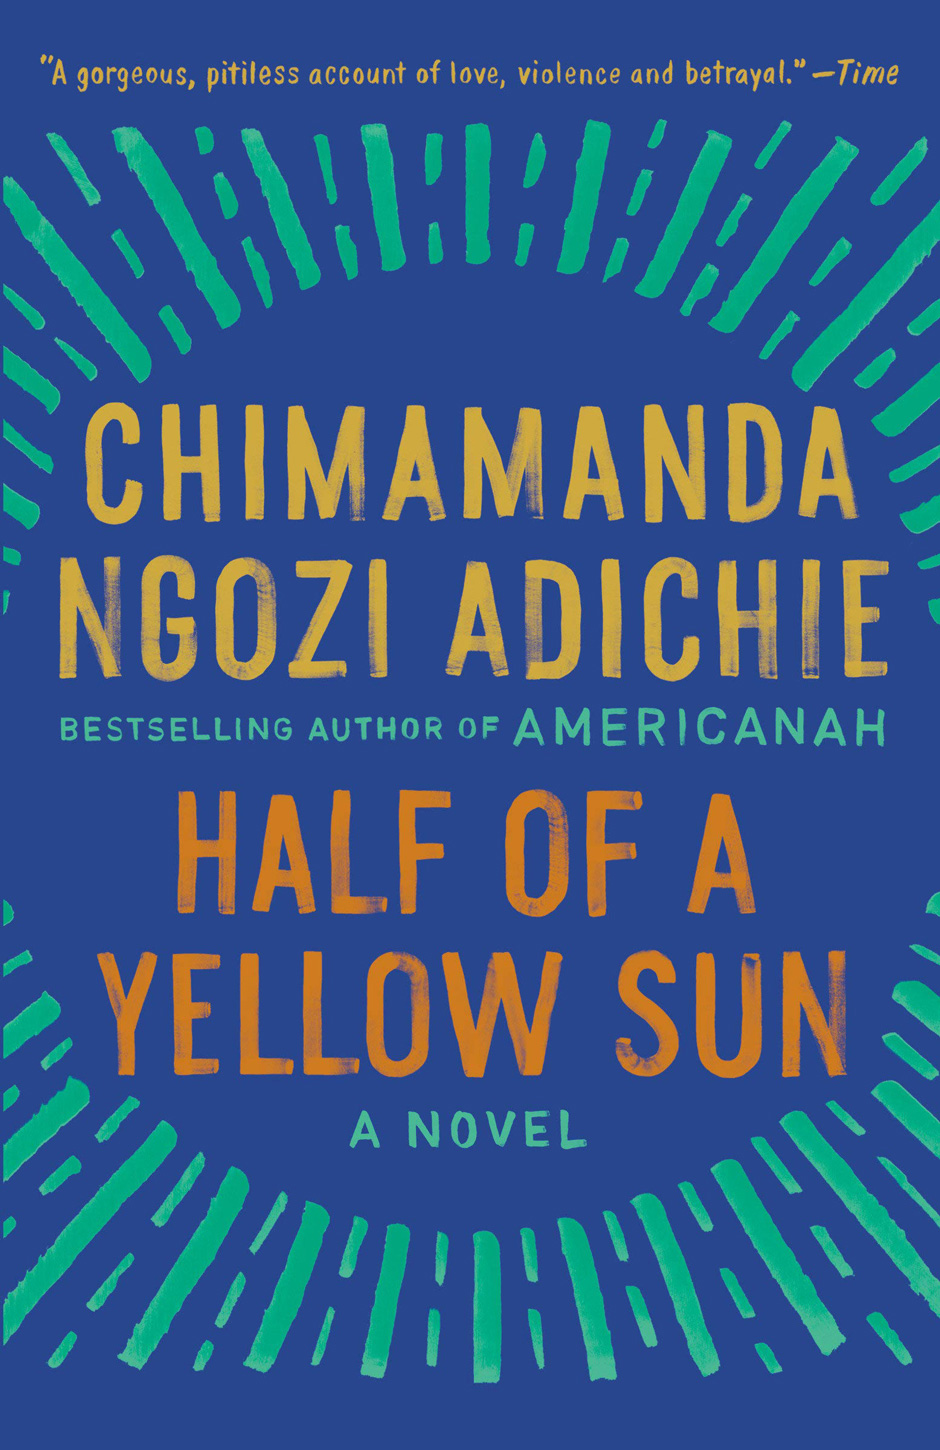 Half Of A Yellow Sun was Helena Long's book choice for her Offerings interview